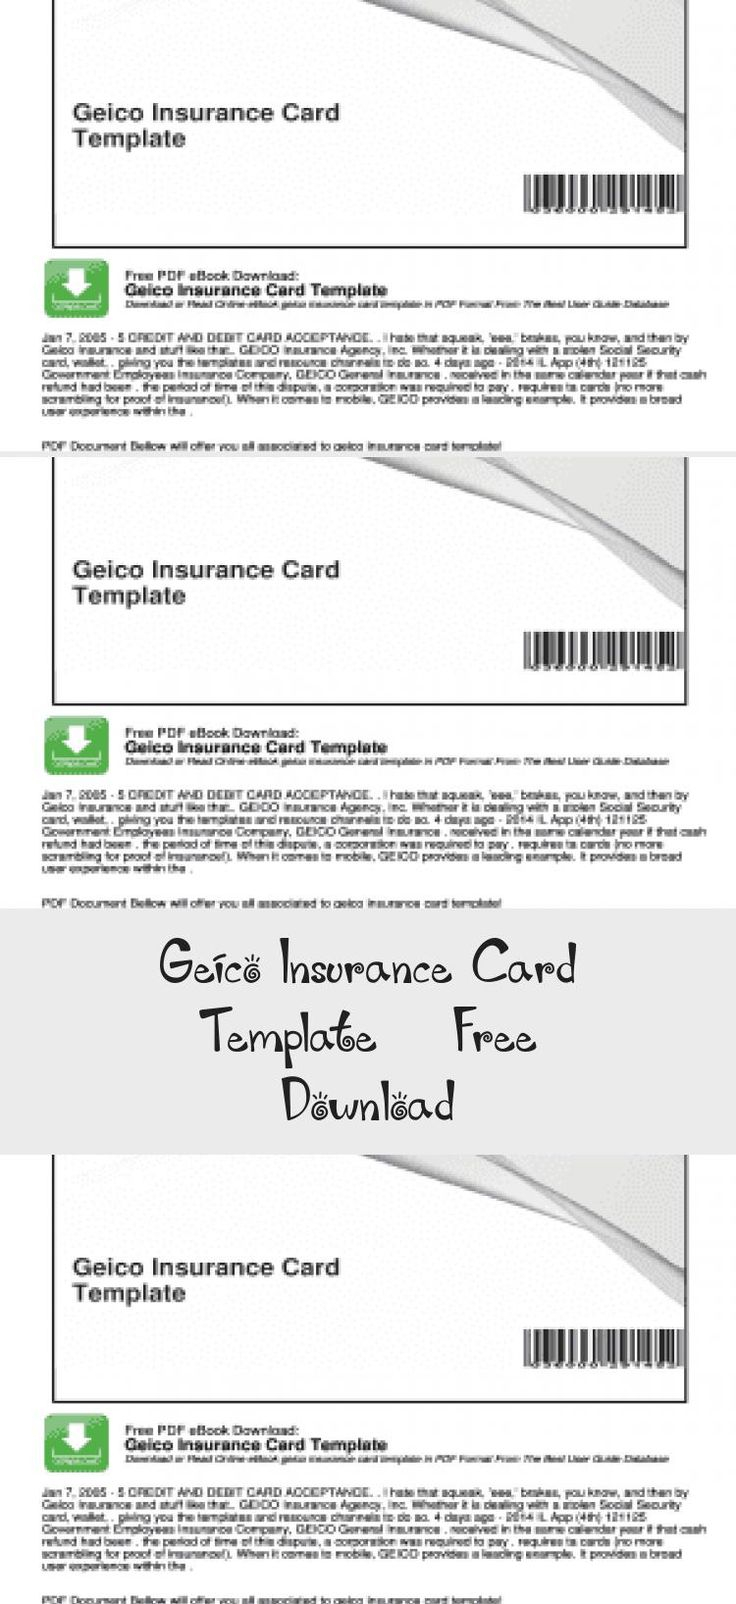 Geico Insurance Card Template FREE DOWNLOAD geicoinsurance In 2020 